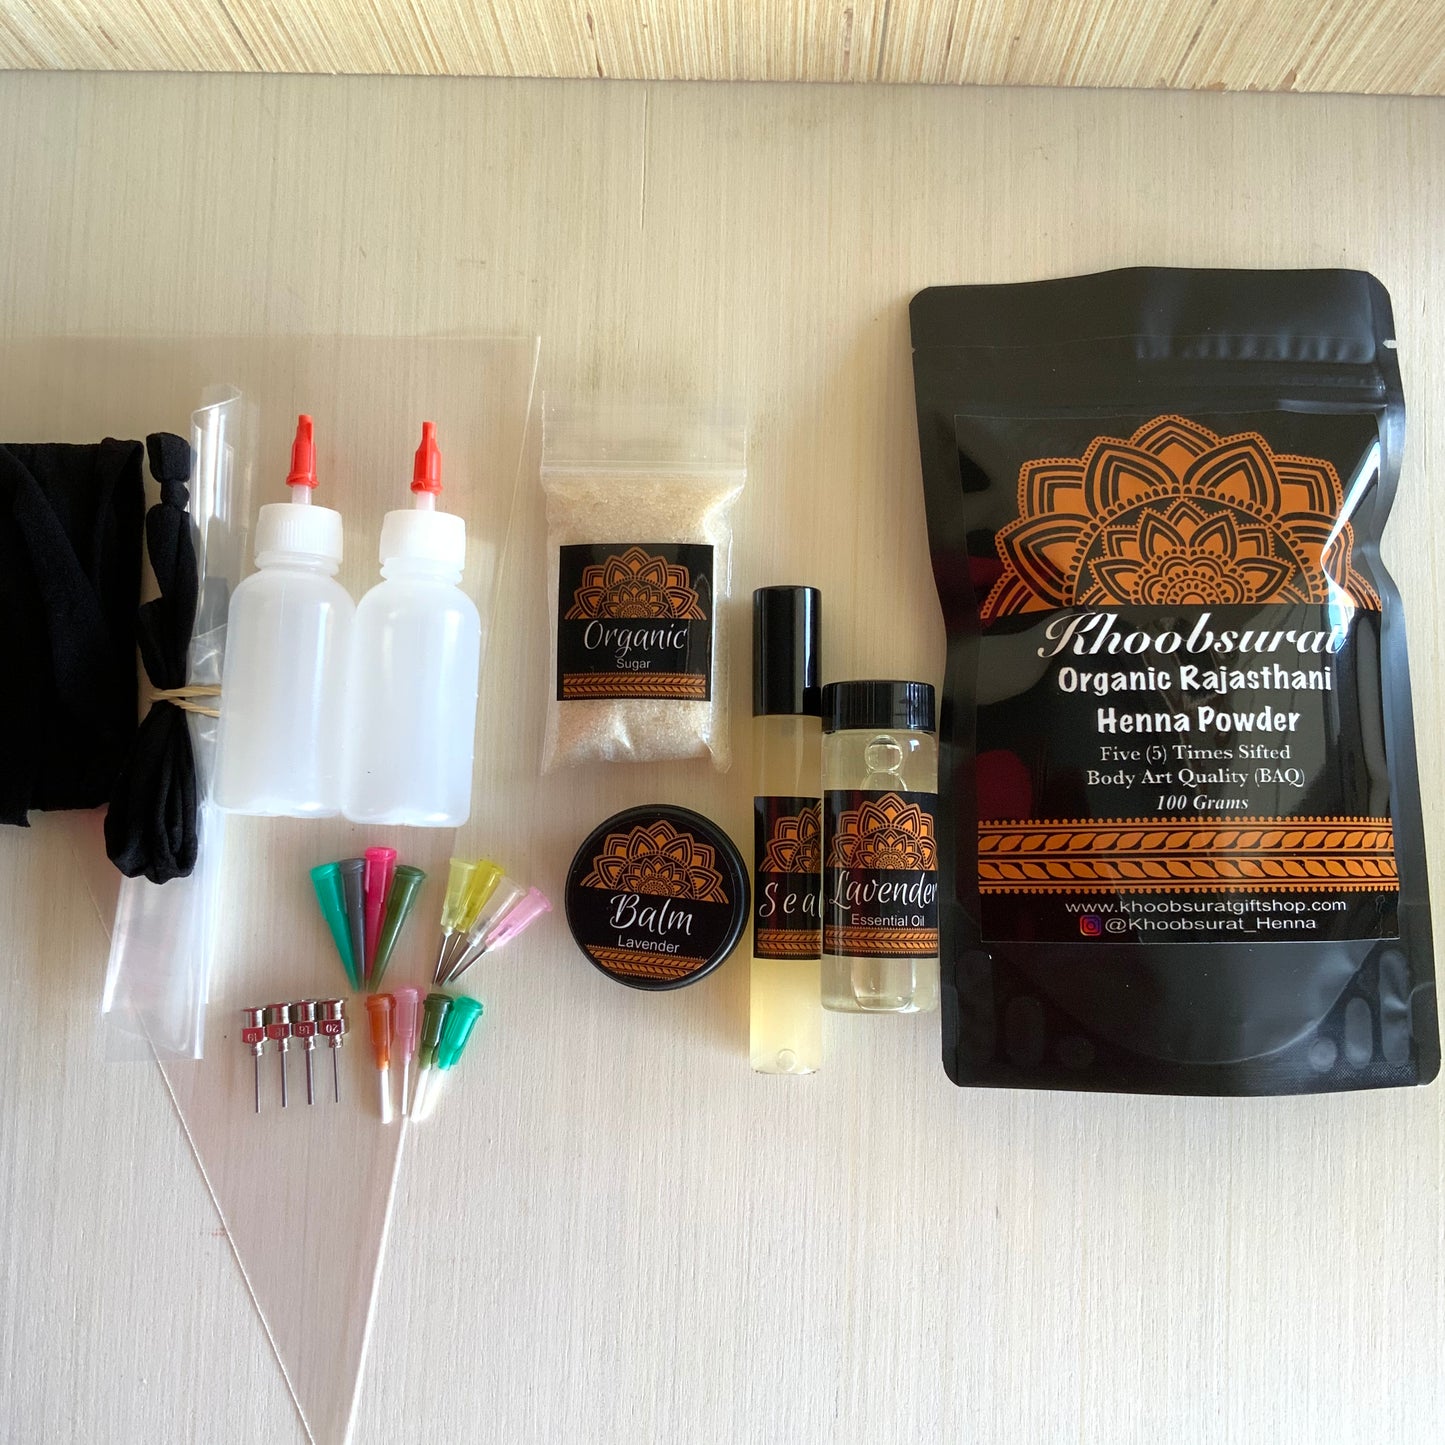 Ultimate DIY Henna Kit 100 Grams Henna Powder With Bottles, Aftercare Balm, Sealant, Instructions and Designs